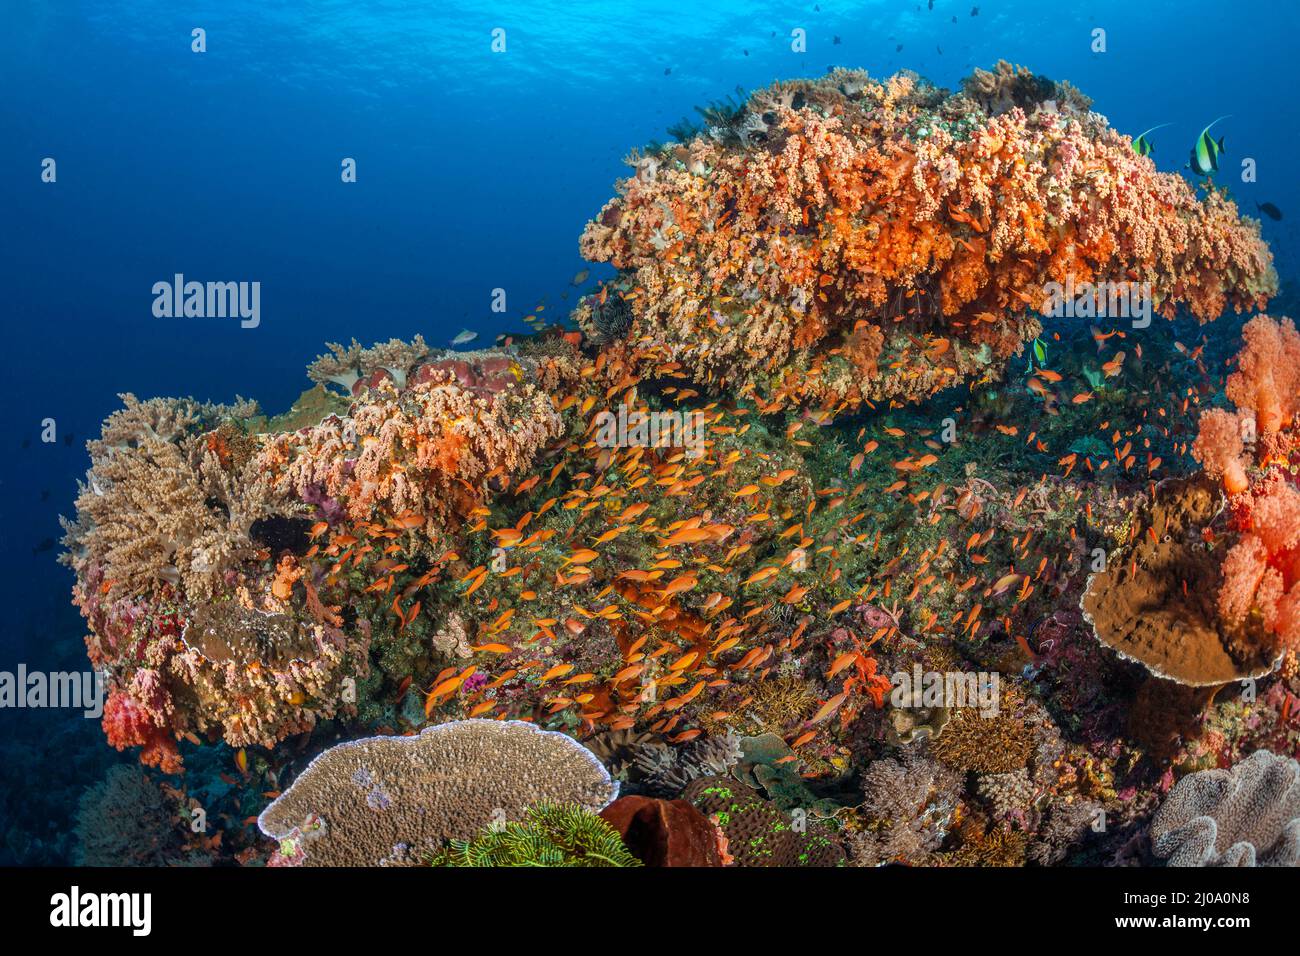 Both soft and hard coral along with schooling anthias and various reef fish, dominate this underwater scene, Crystal Bay, Nusa Penida, Bali Island, In Stock Photo